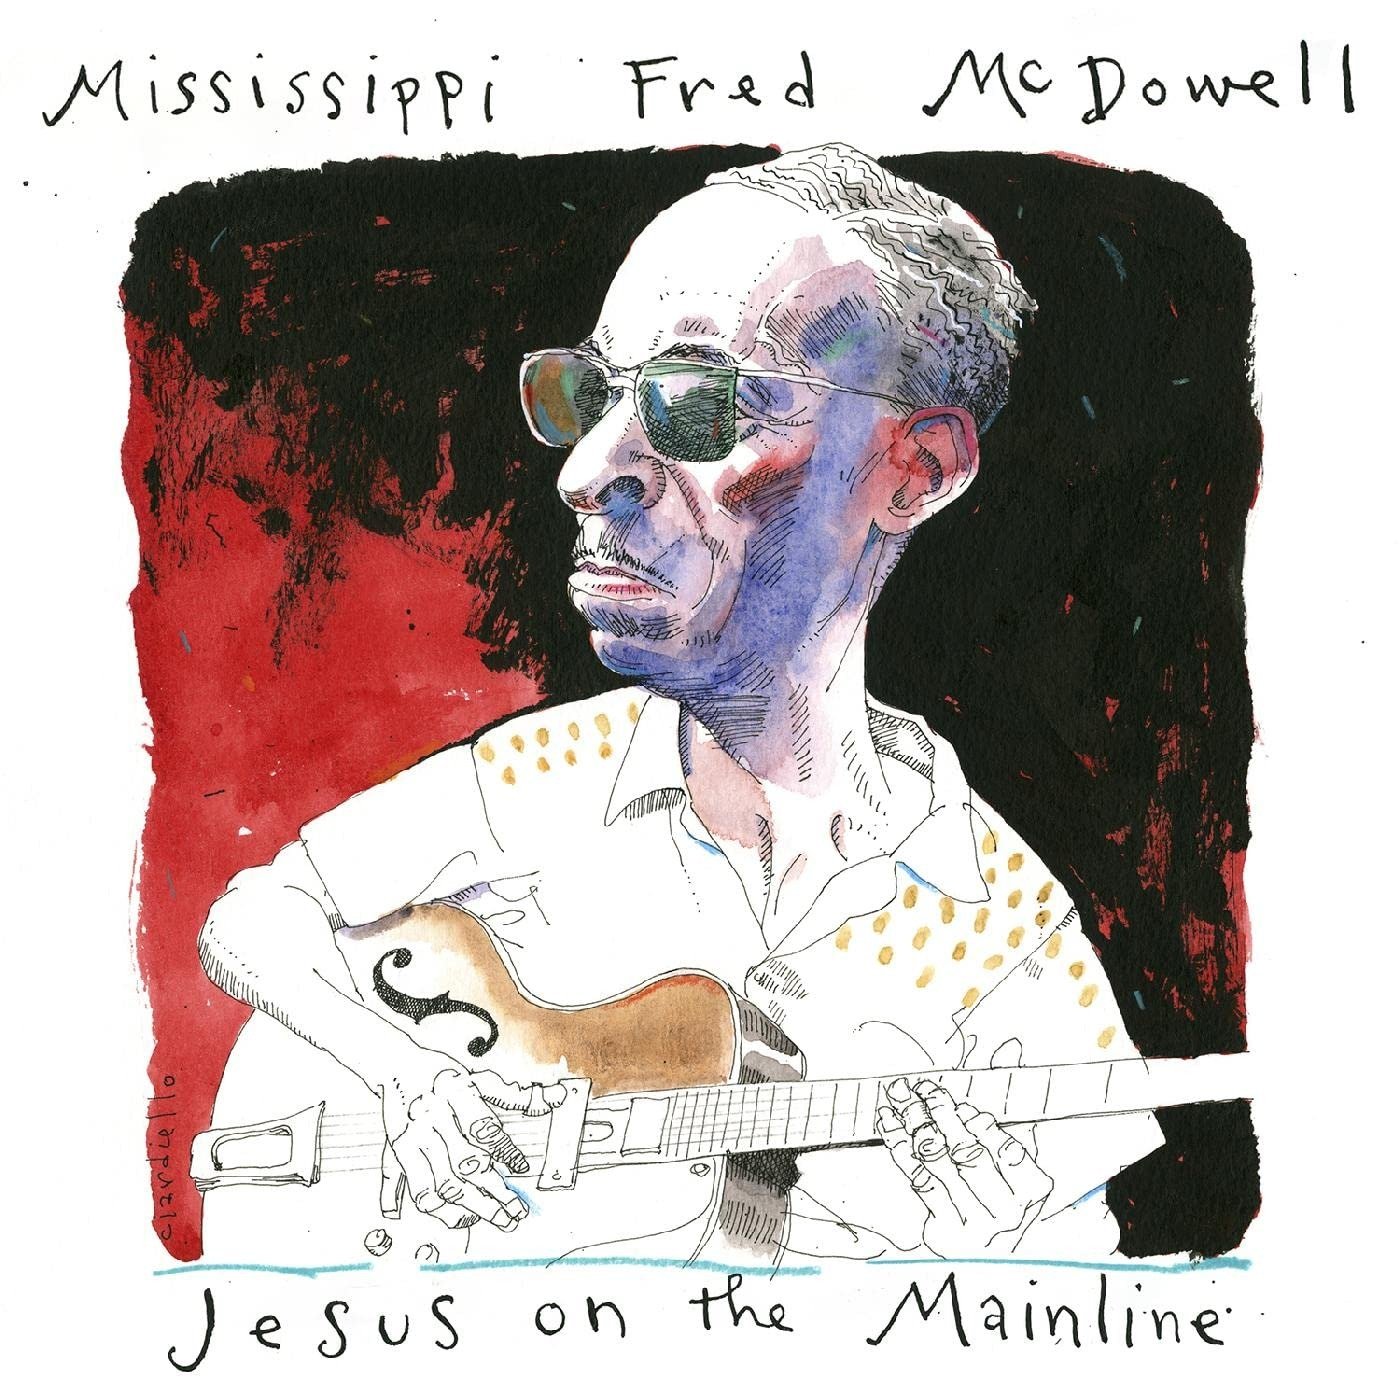 CD Shop - MCDOWELL, MISSISSIPPI FRED JESUS ON THE MAINLINE